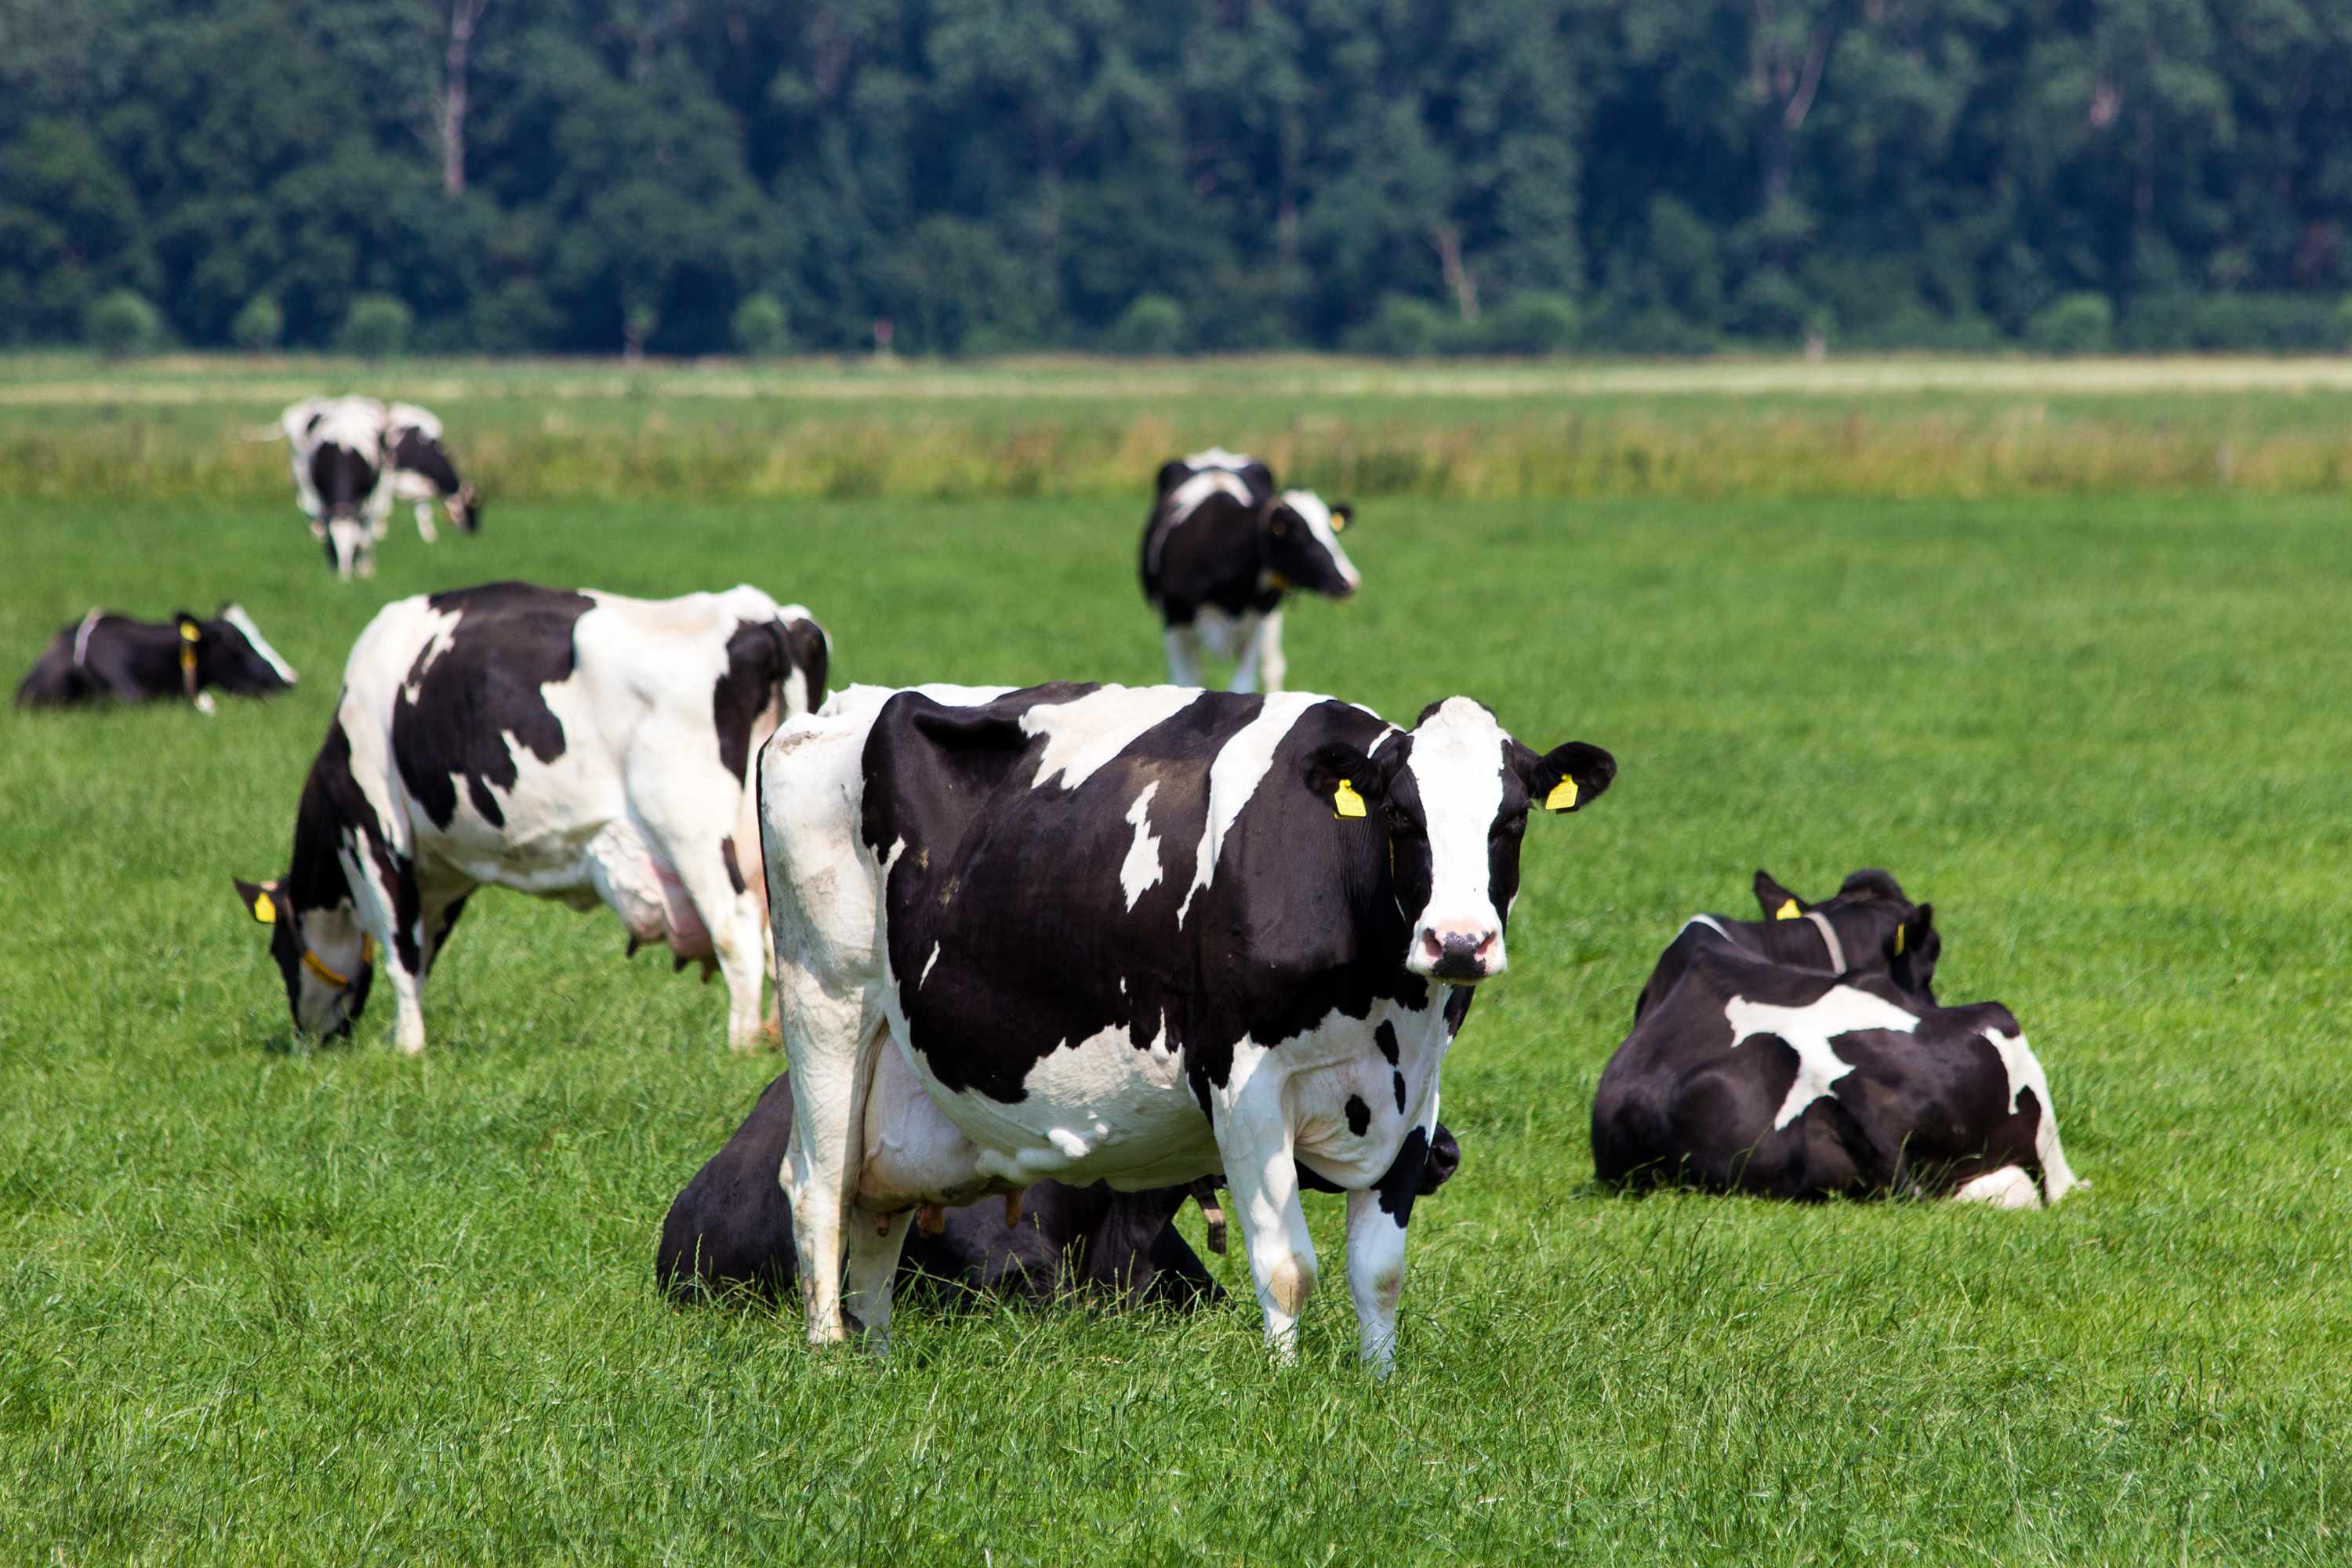 Black and white dairy cows standing in a field of grass on a farm